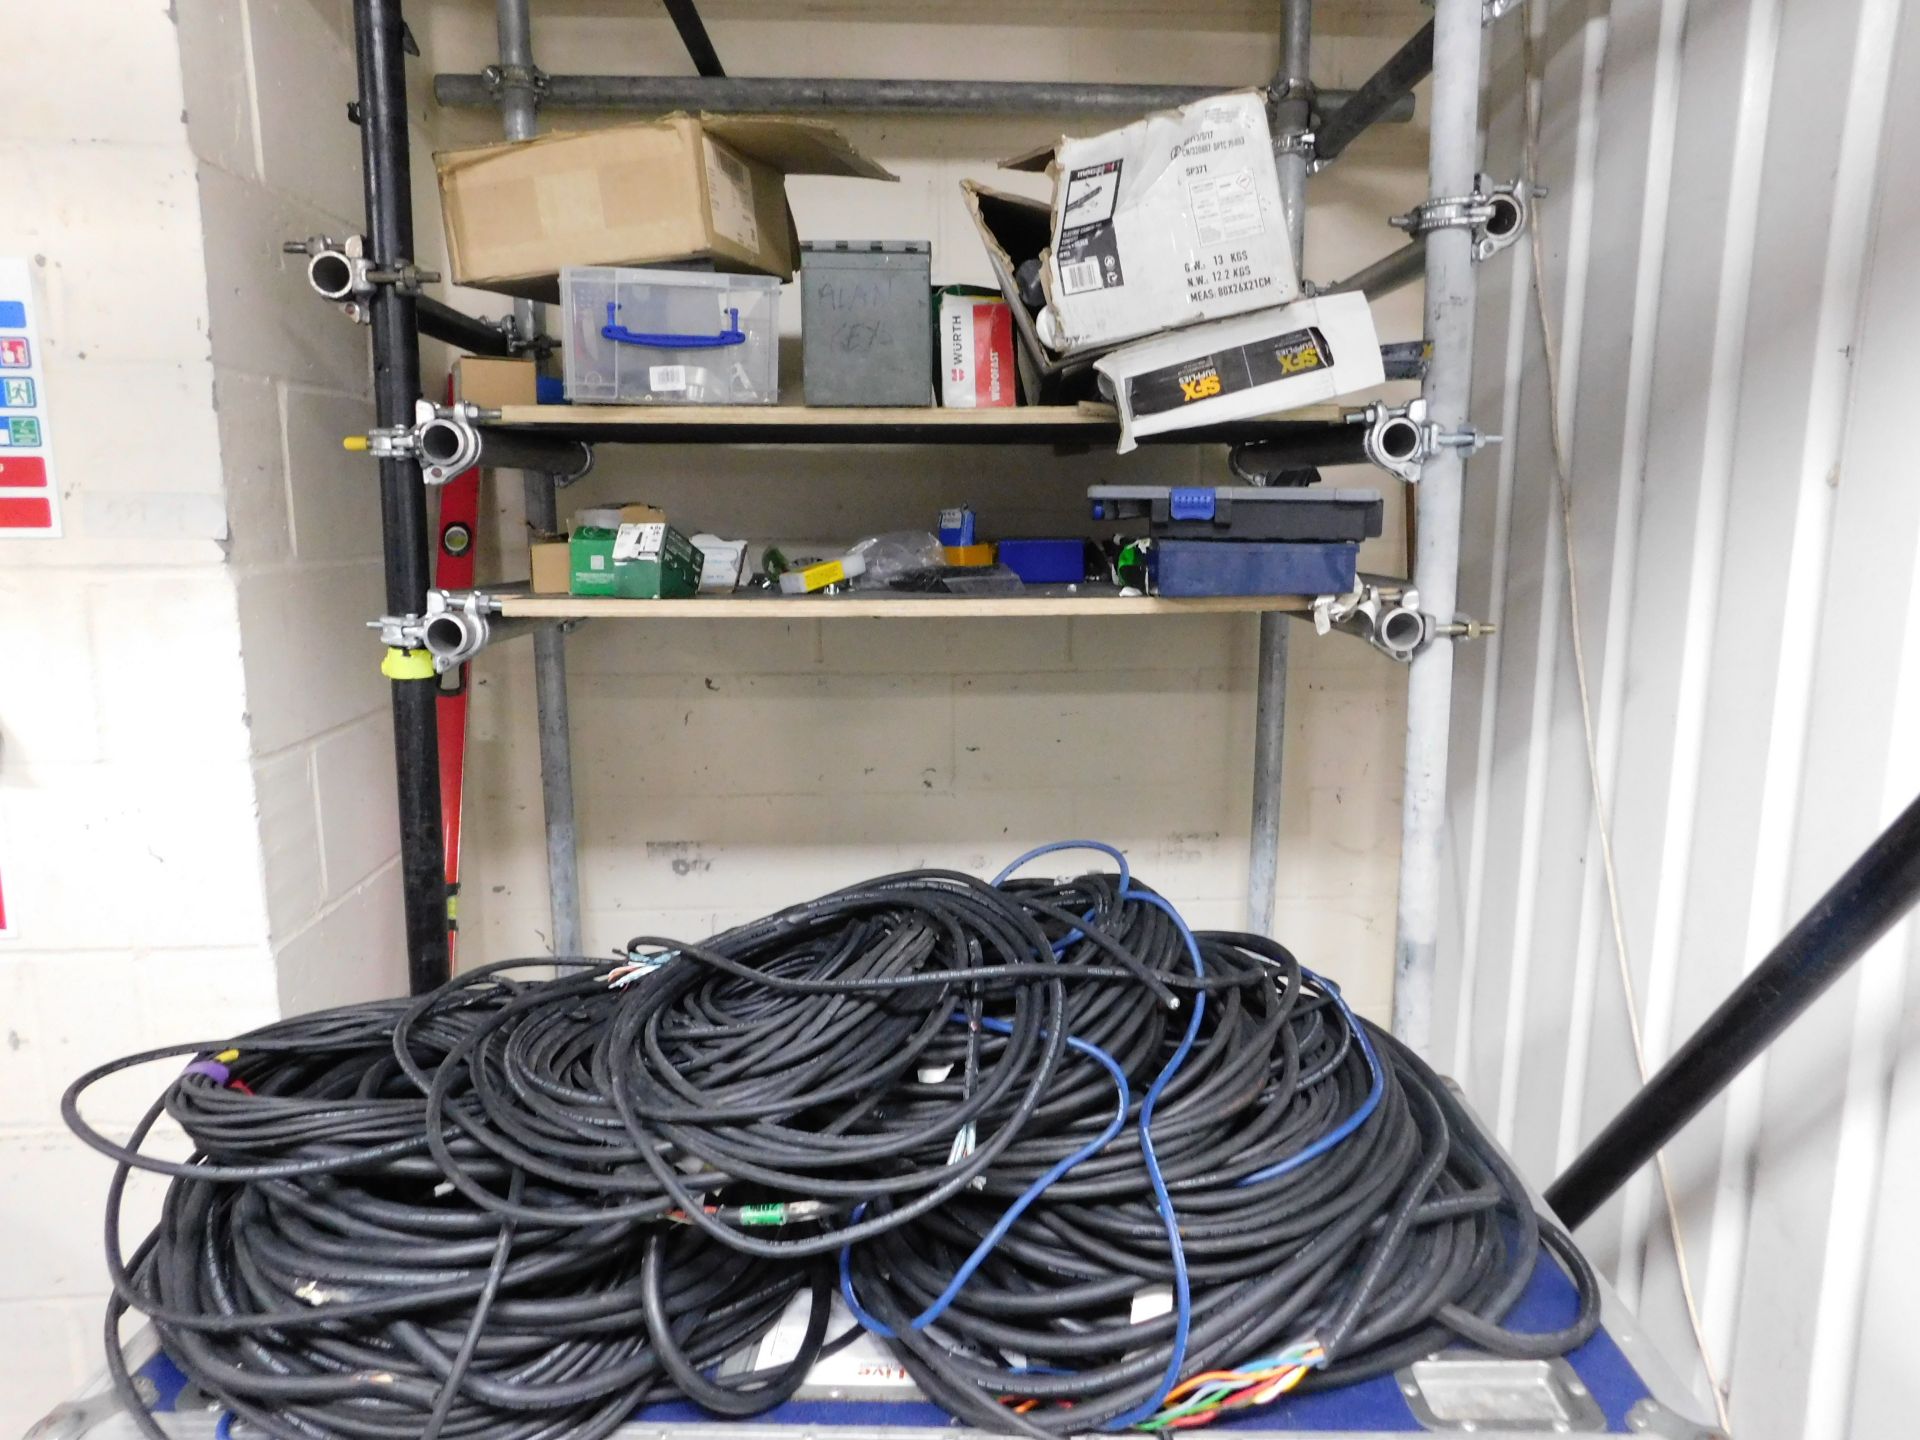 Cable, Power Leads & Contents of Rack (Location: South East London. Please Refer to General Notes)